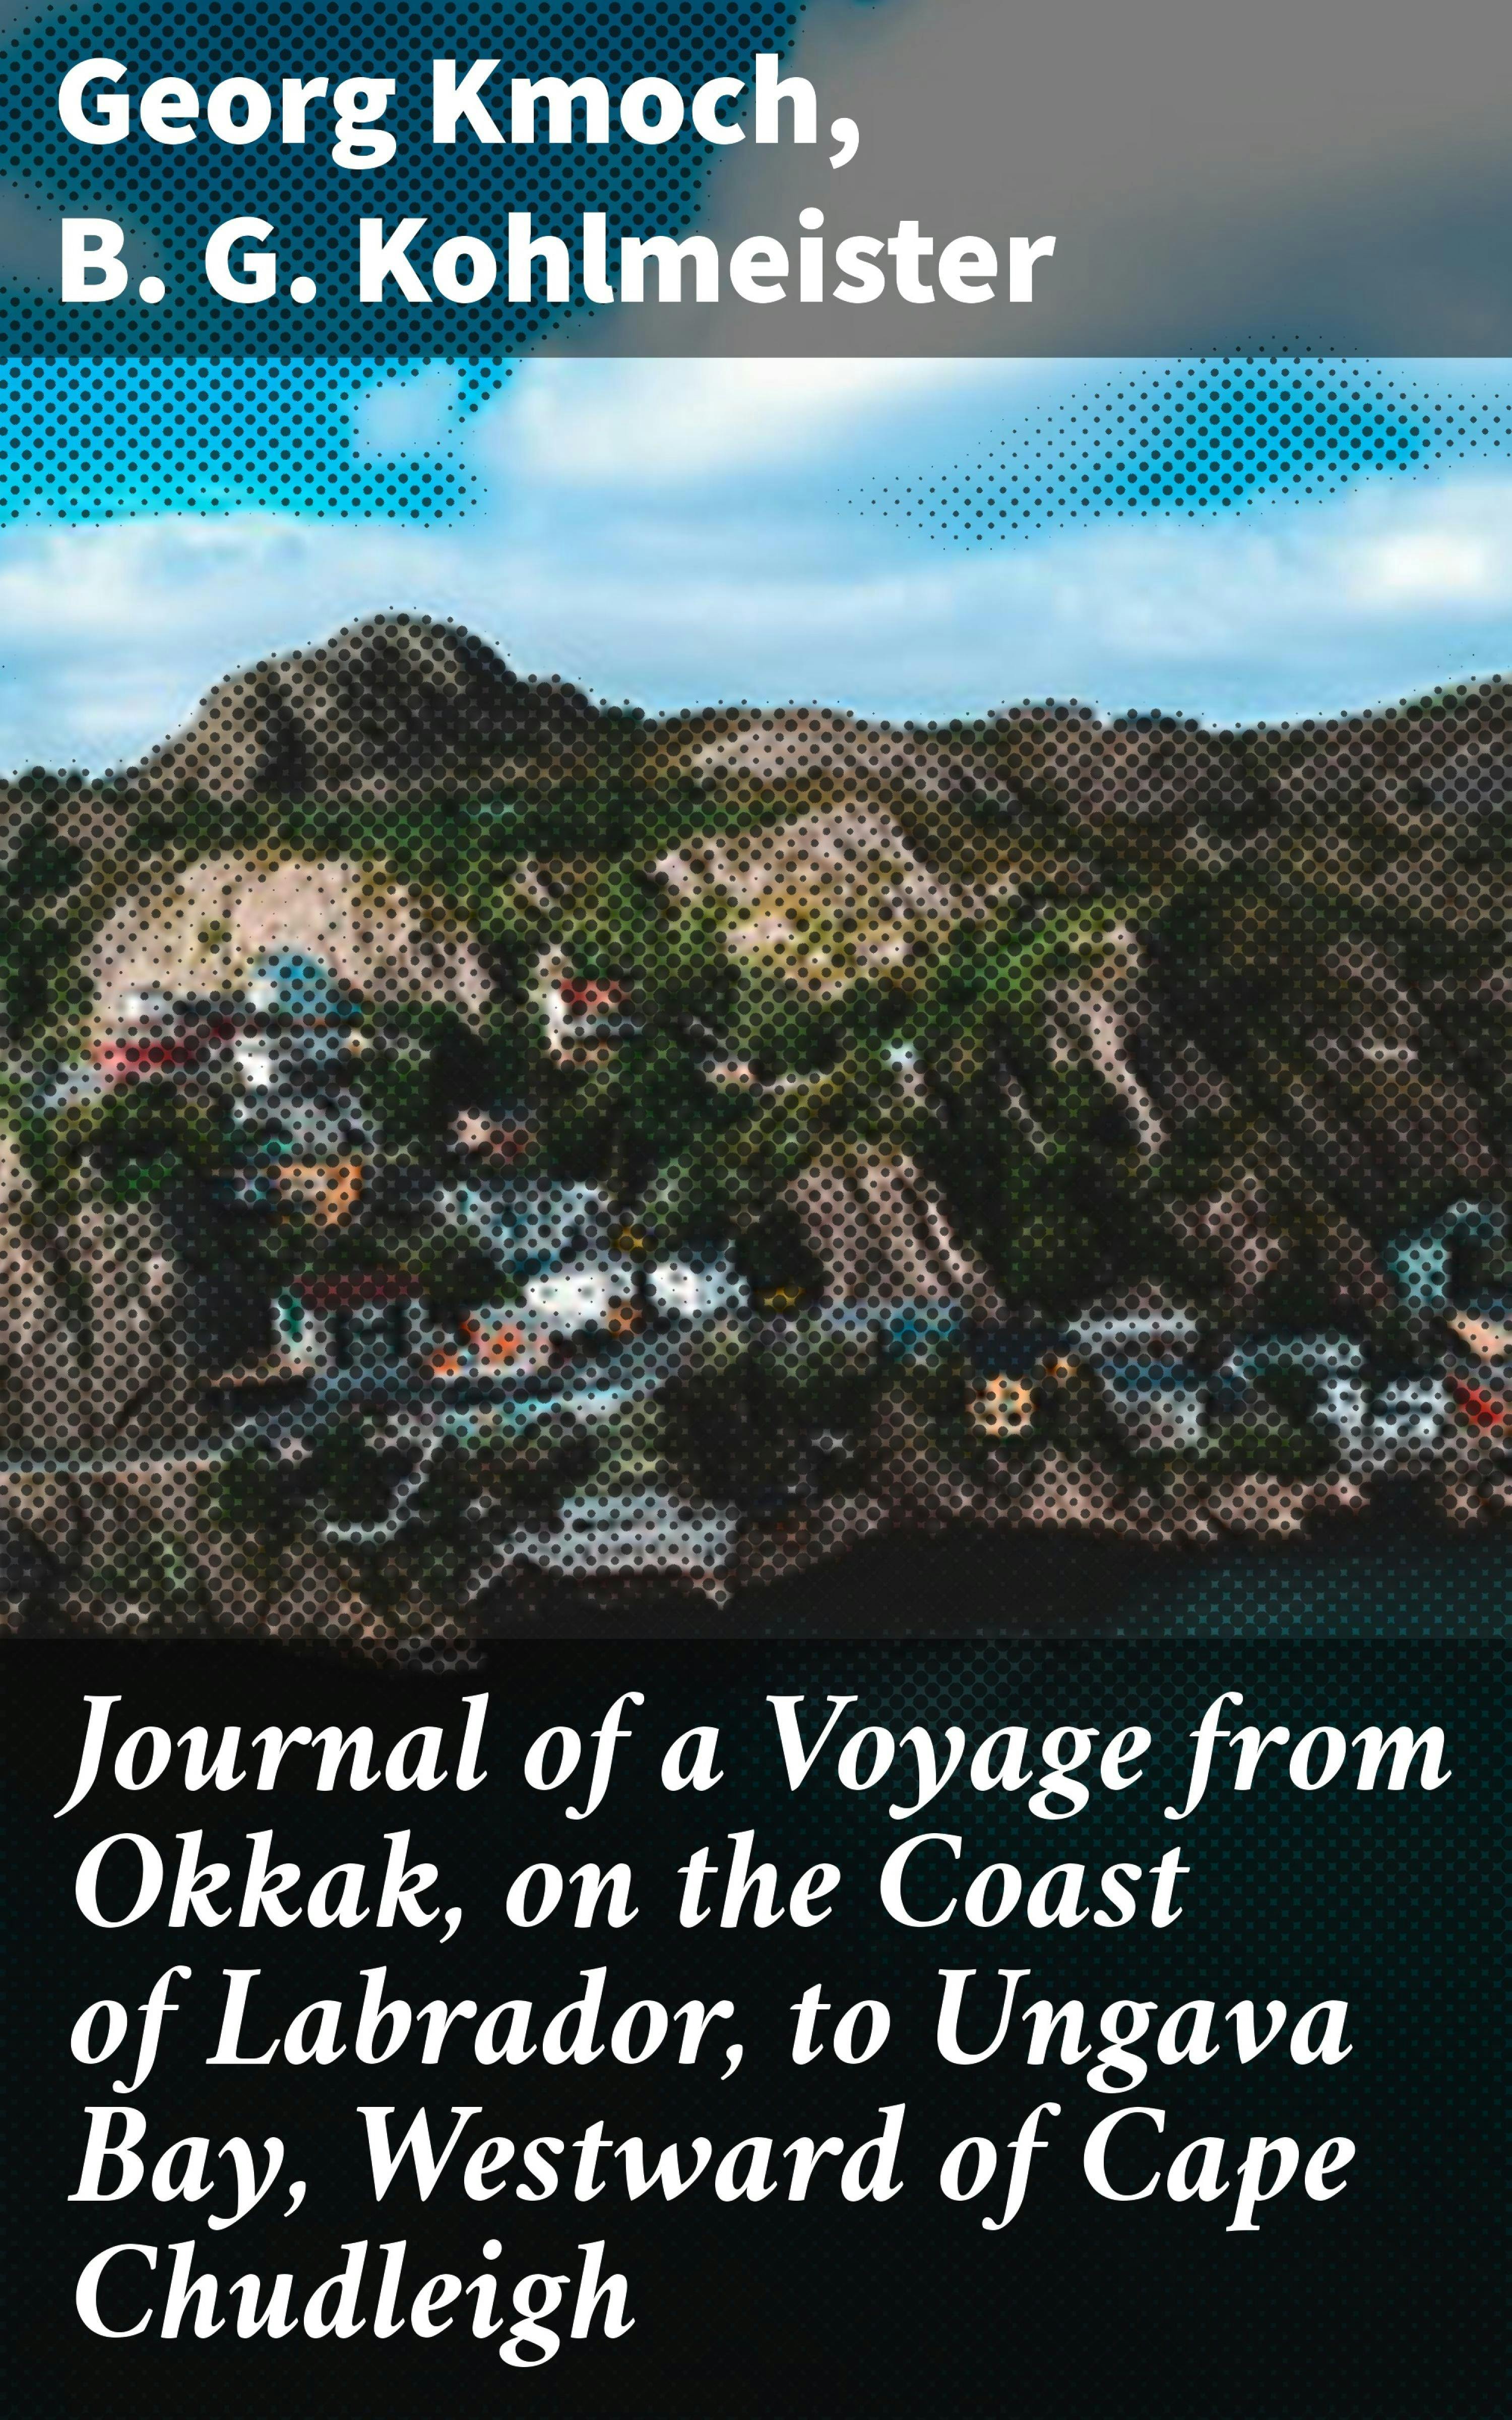 Journal of a Voyage from Okkak, on the Coast of Labrador, to Ungava Bay, Westward of Cape Chudleigh: Undertaken to Explore the Coast, and Visit the Esquimaux in That Unknown Region - B. G. Kohlmeister, Georg Kmoch